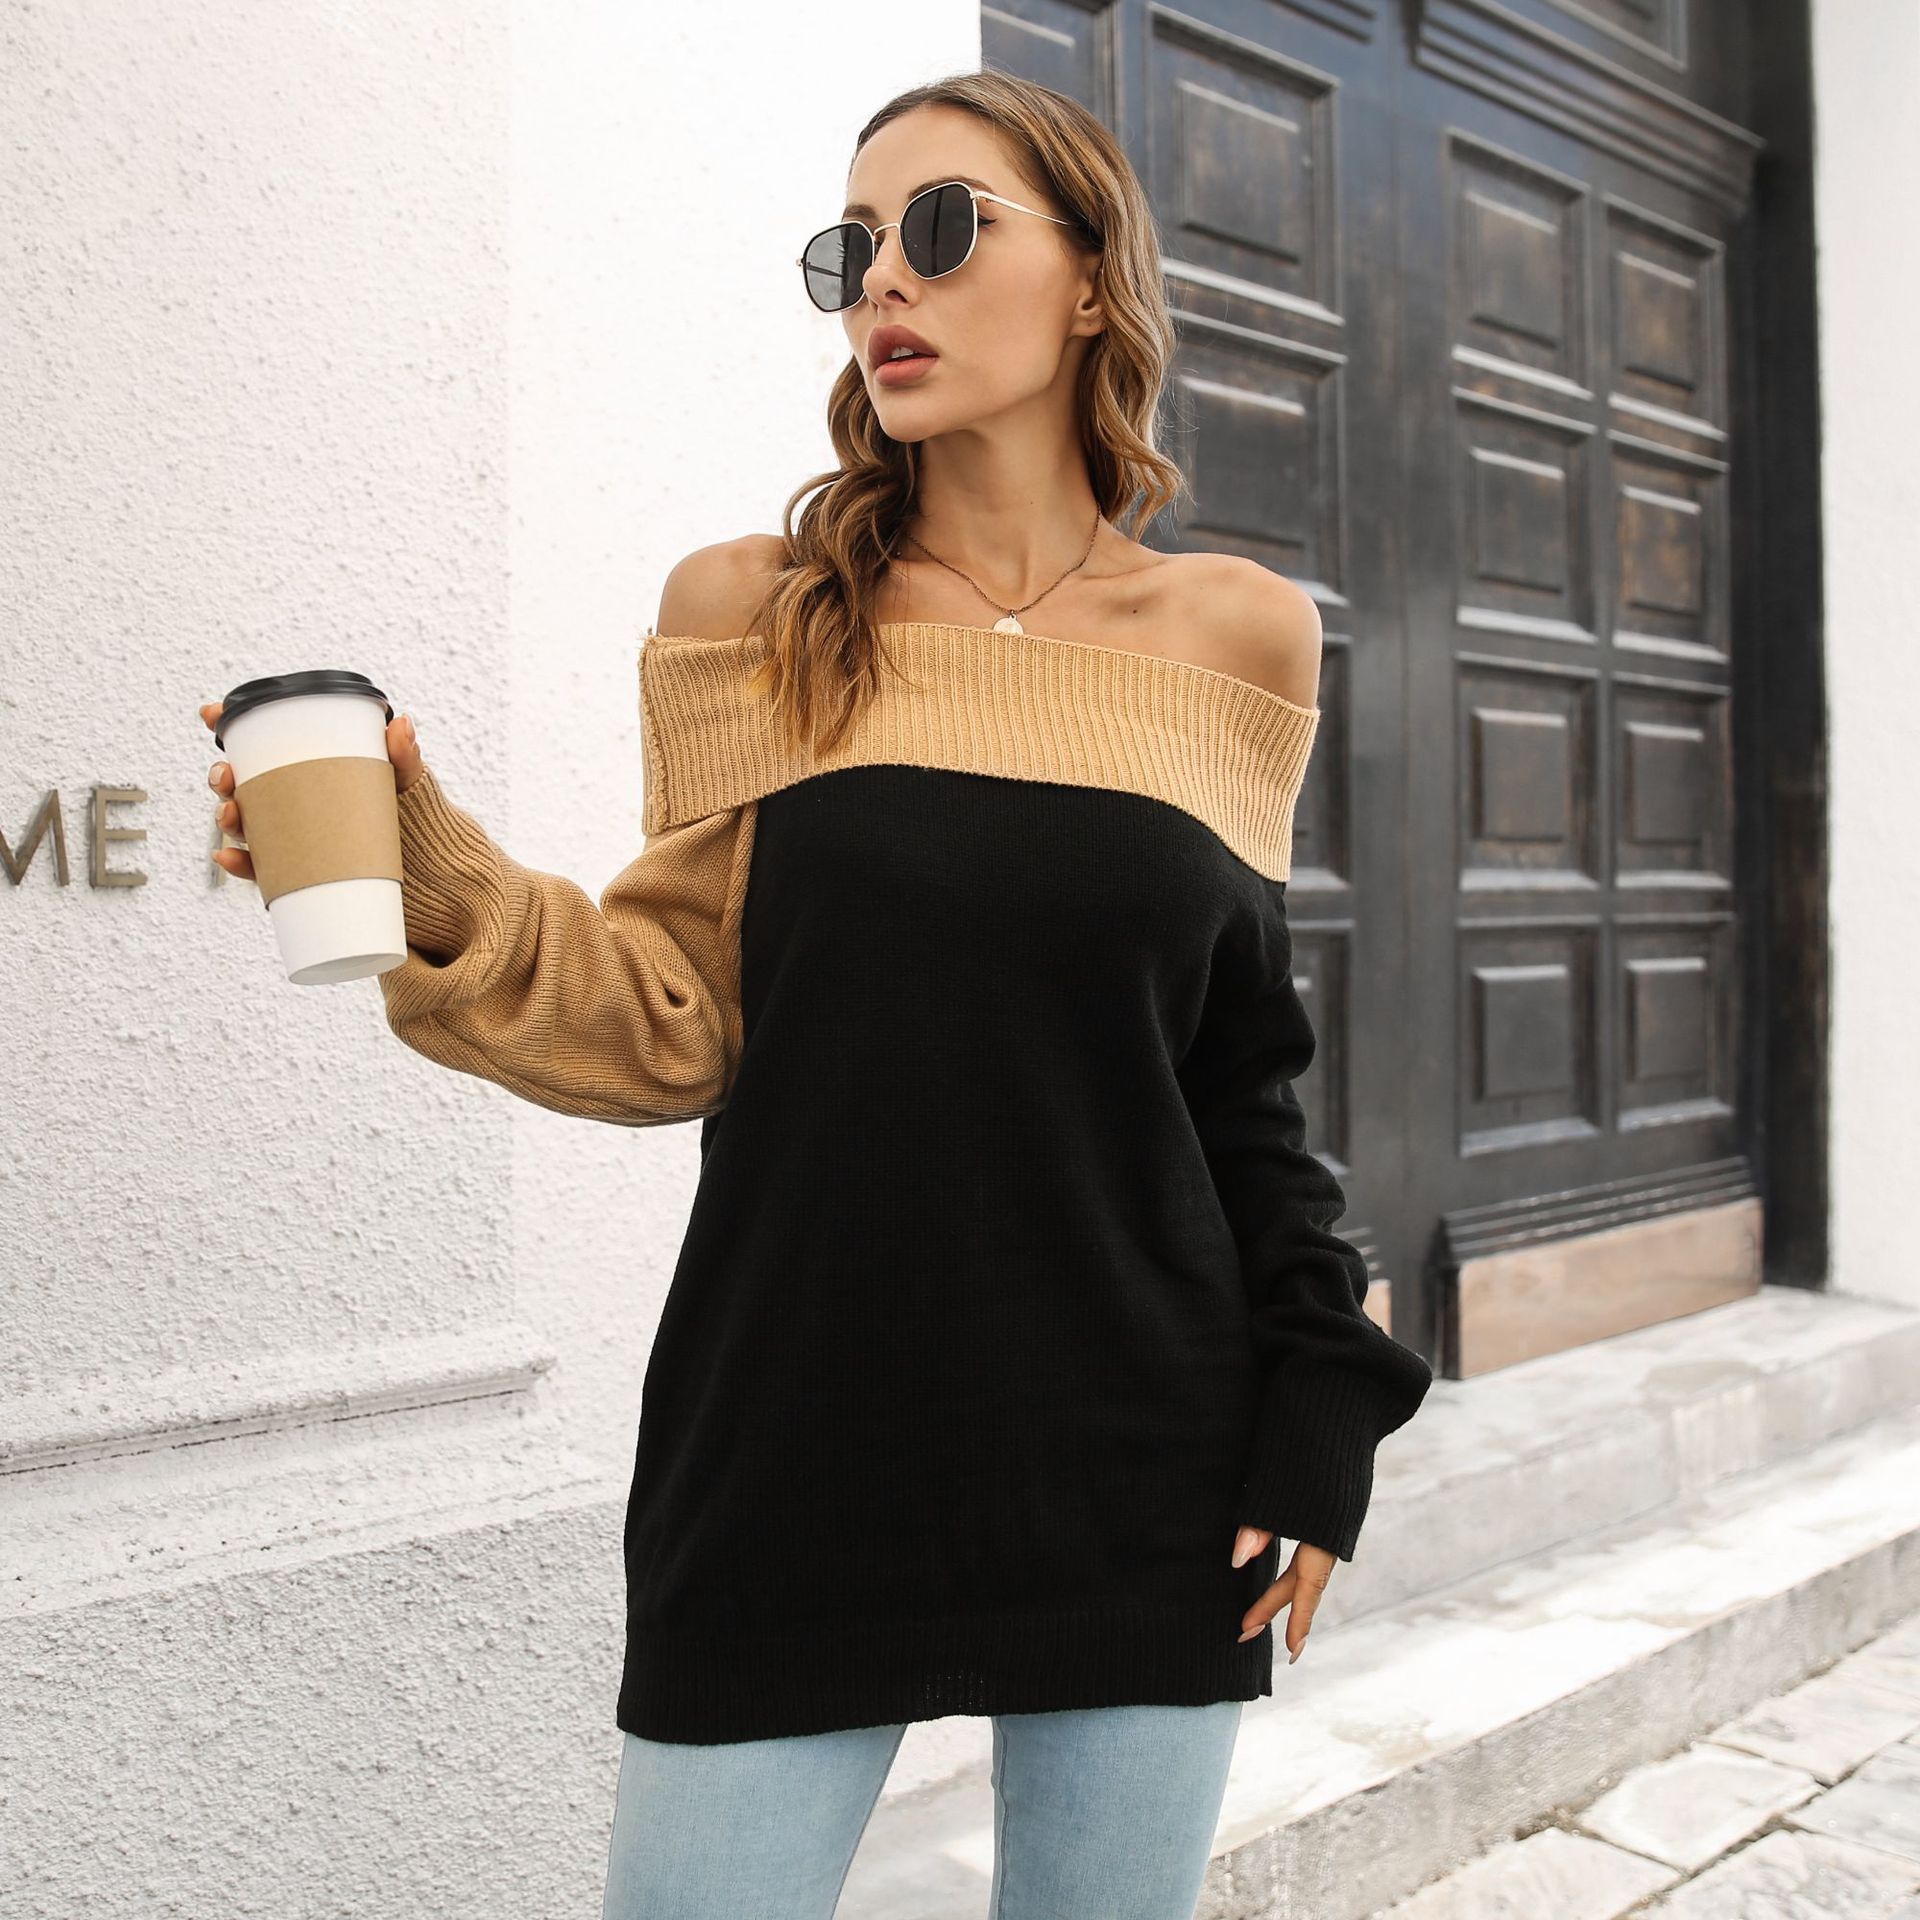 Slotted neck sweater for women